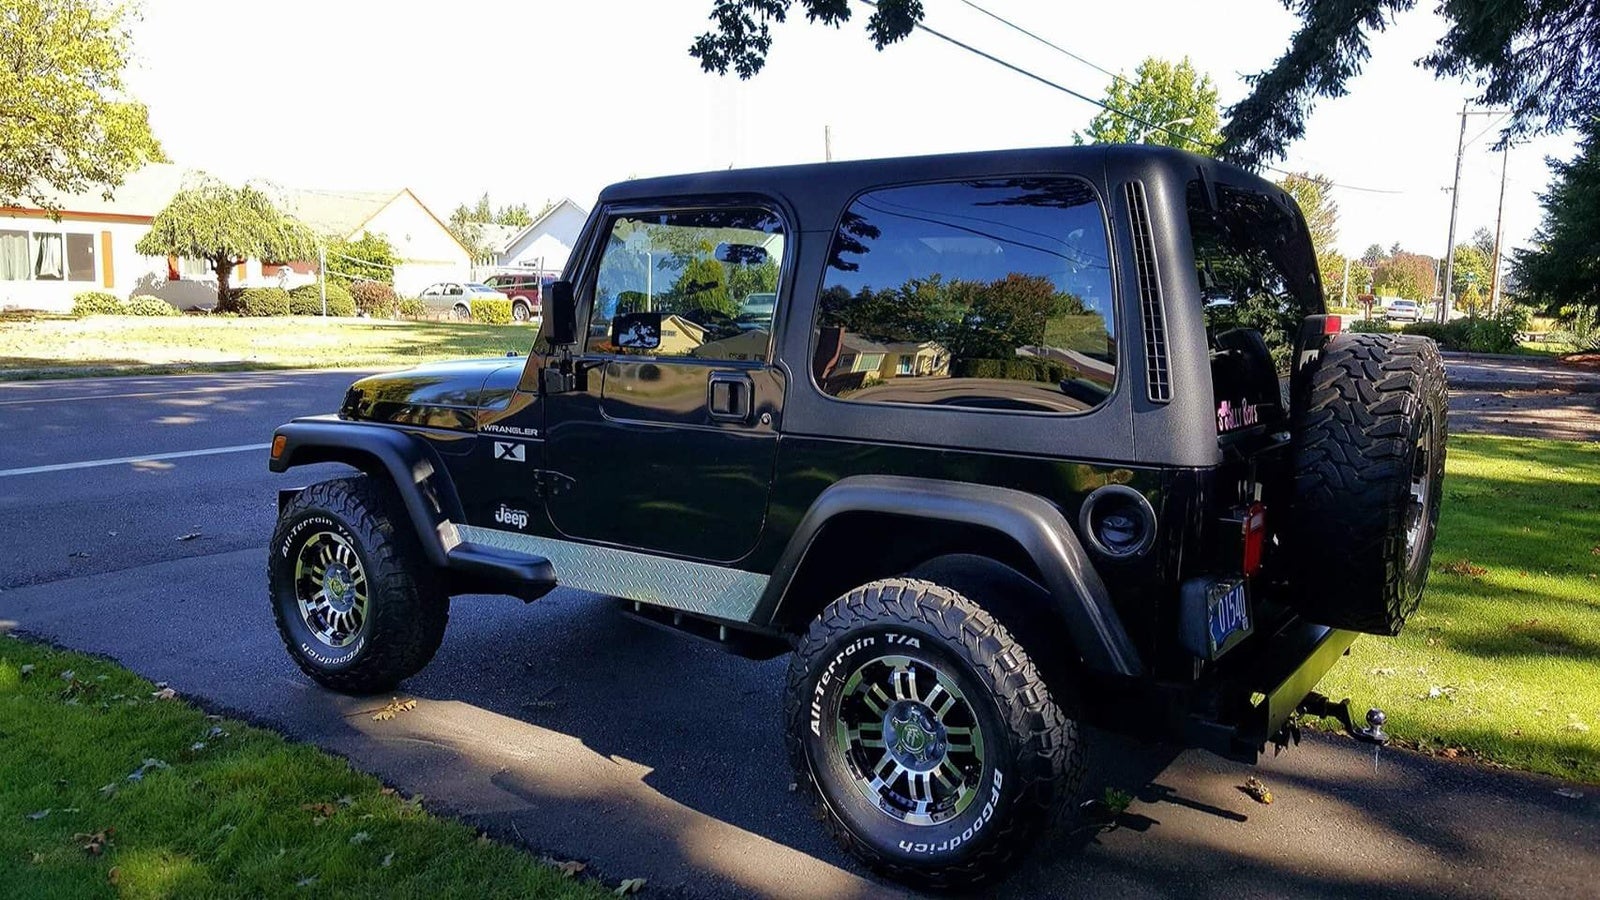 Jeep Wrangler Questions - 2002 jeep wrangler  100,000 miles never had a  problem till today. B... - CarGurus